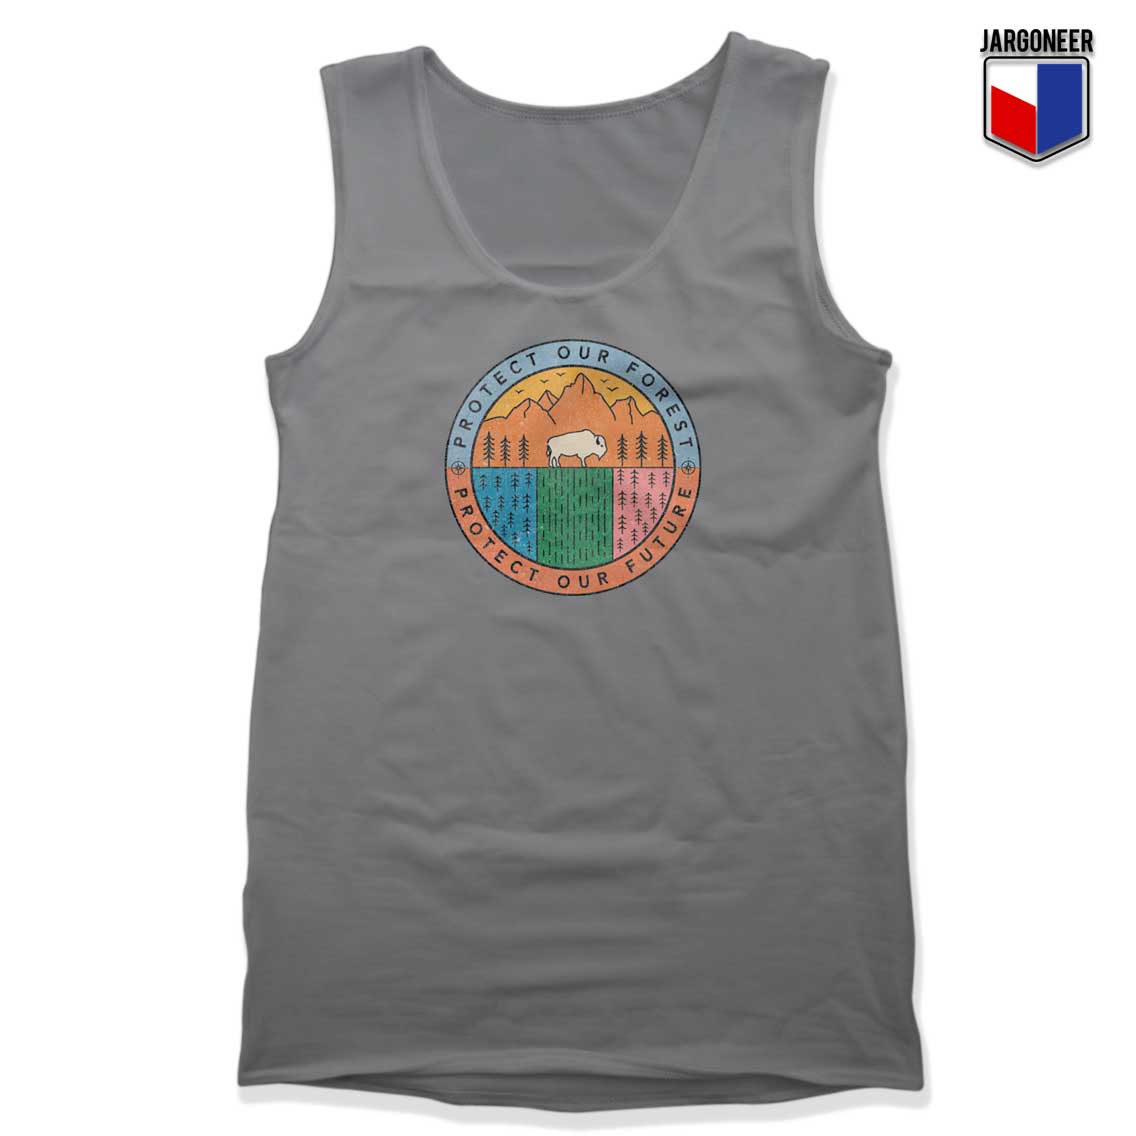 Protect Our Forest Gray Tank Top - Shop Unique Graphic Cool Shirt Designs